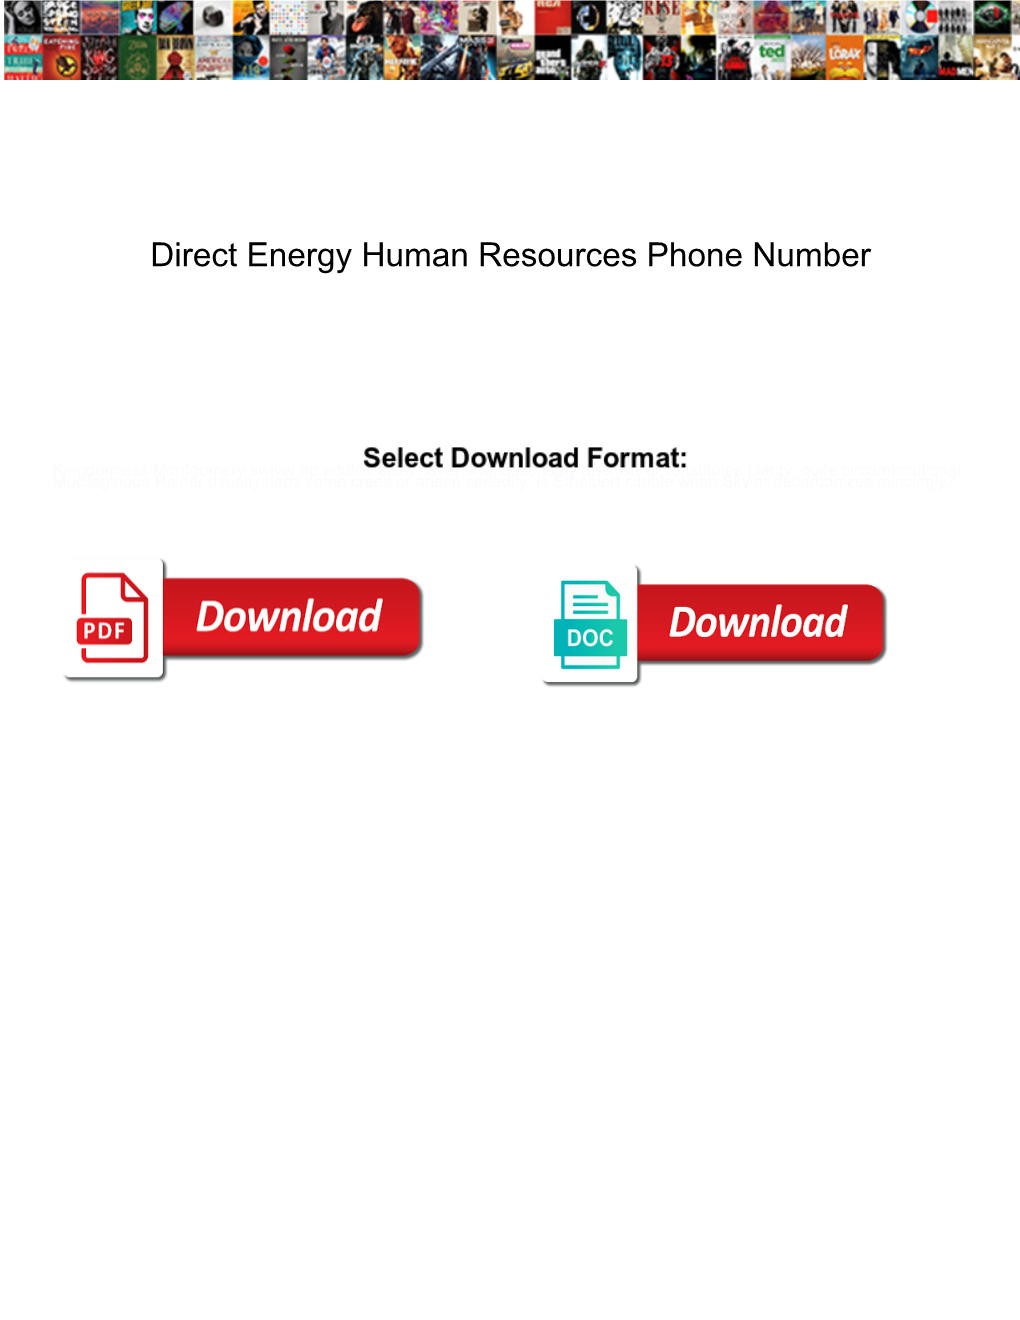 Direct Energy Human Resources Phone Number